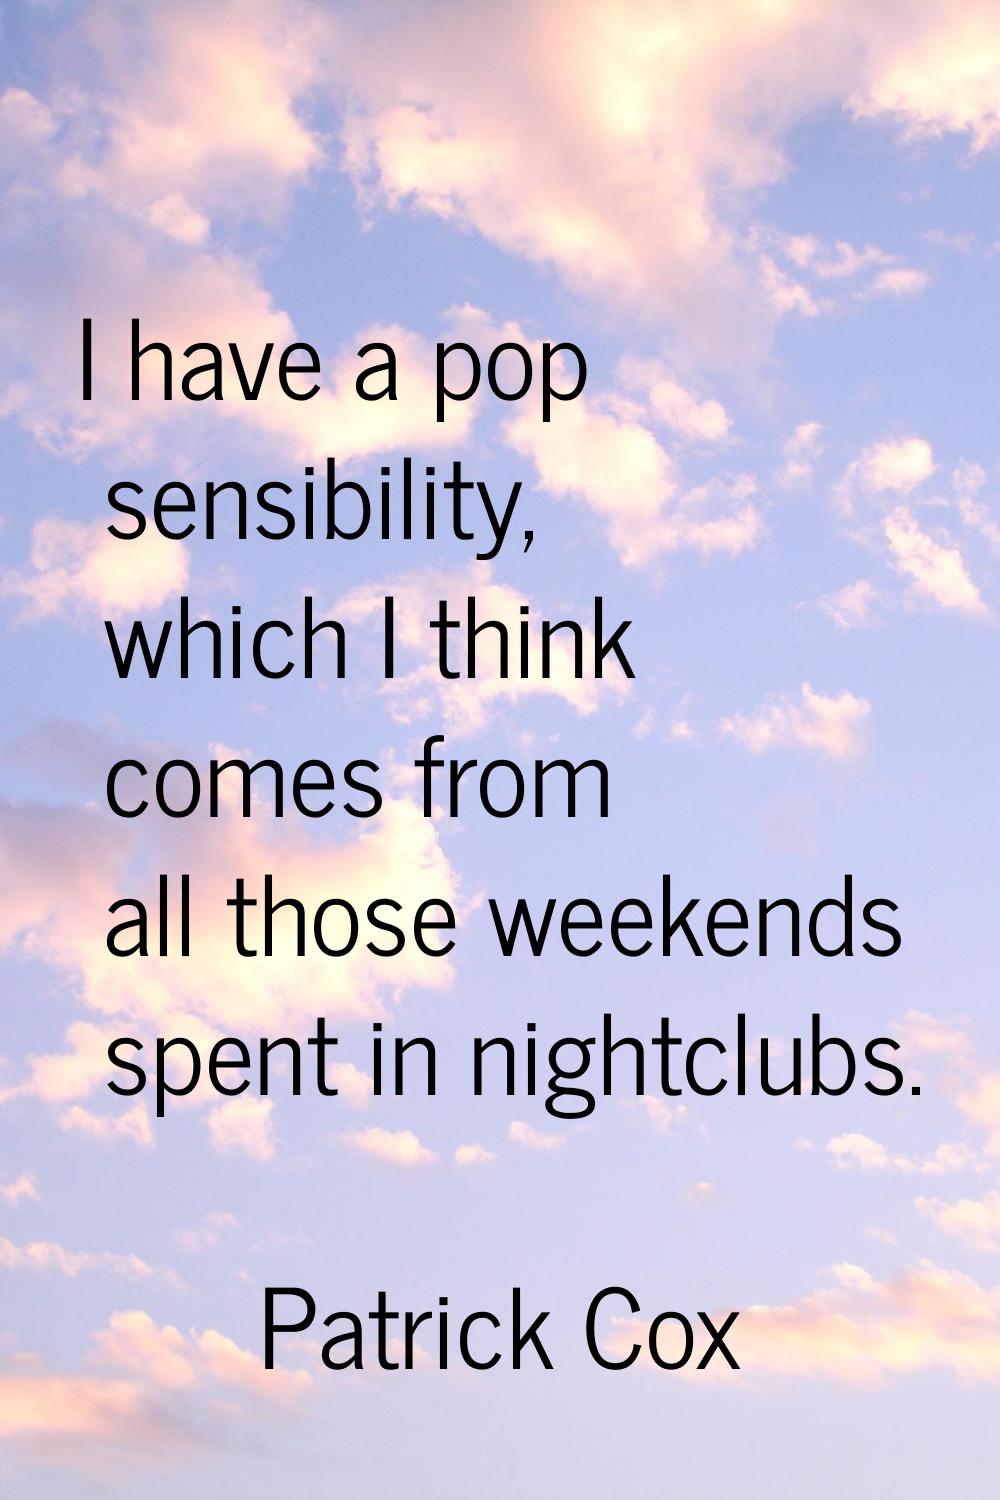 I have a pop sensibility, which I think comes from all those weekends spent in nightclubs.